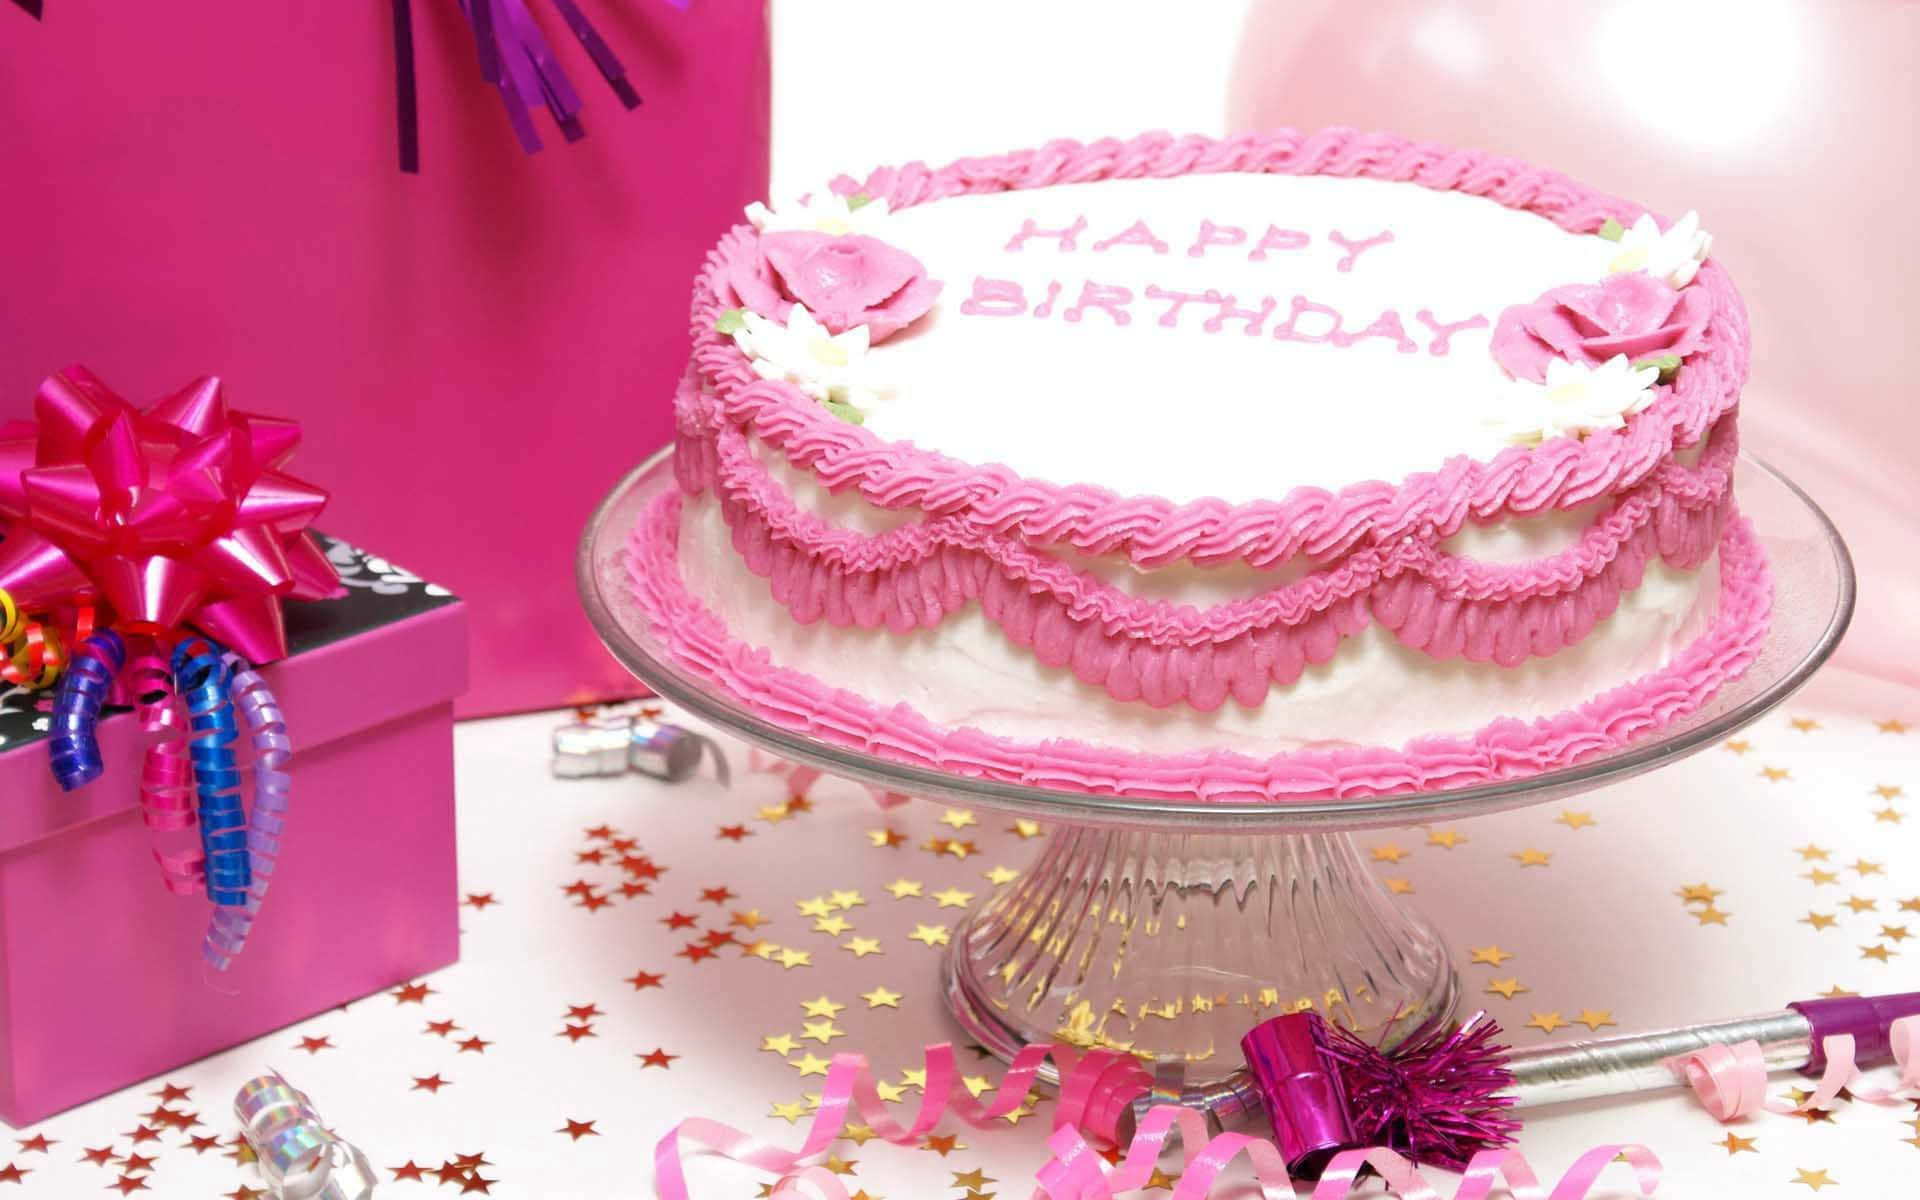 Celebrate in pink on this joyous birthday